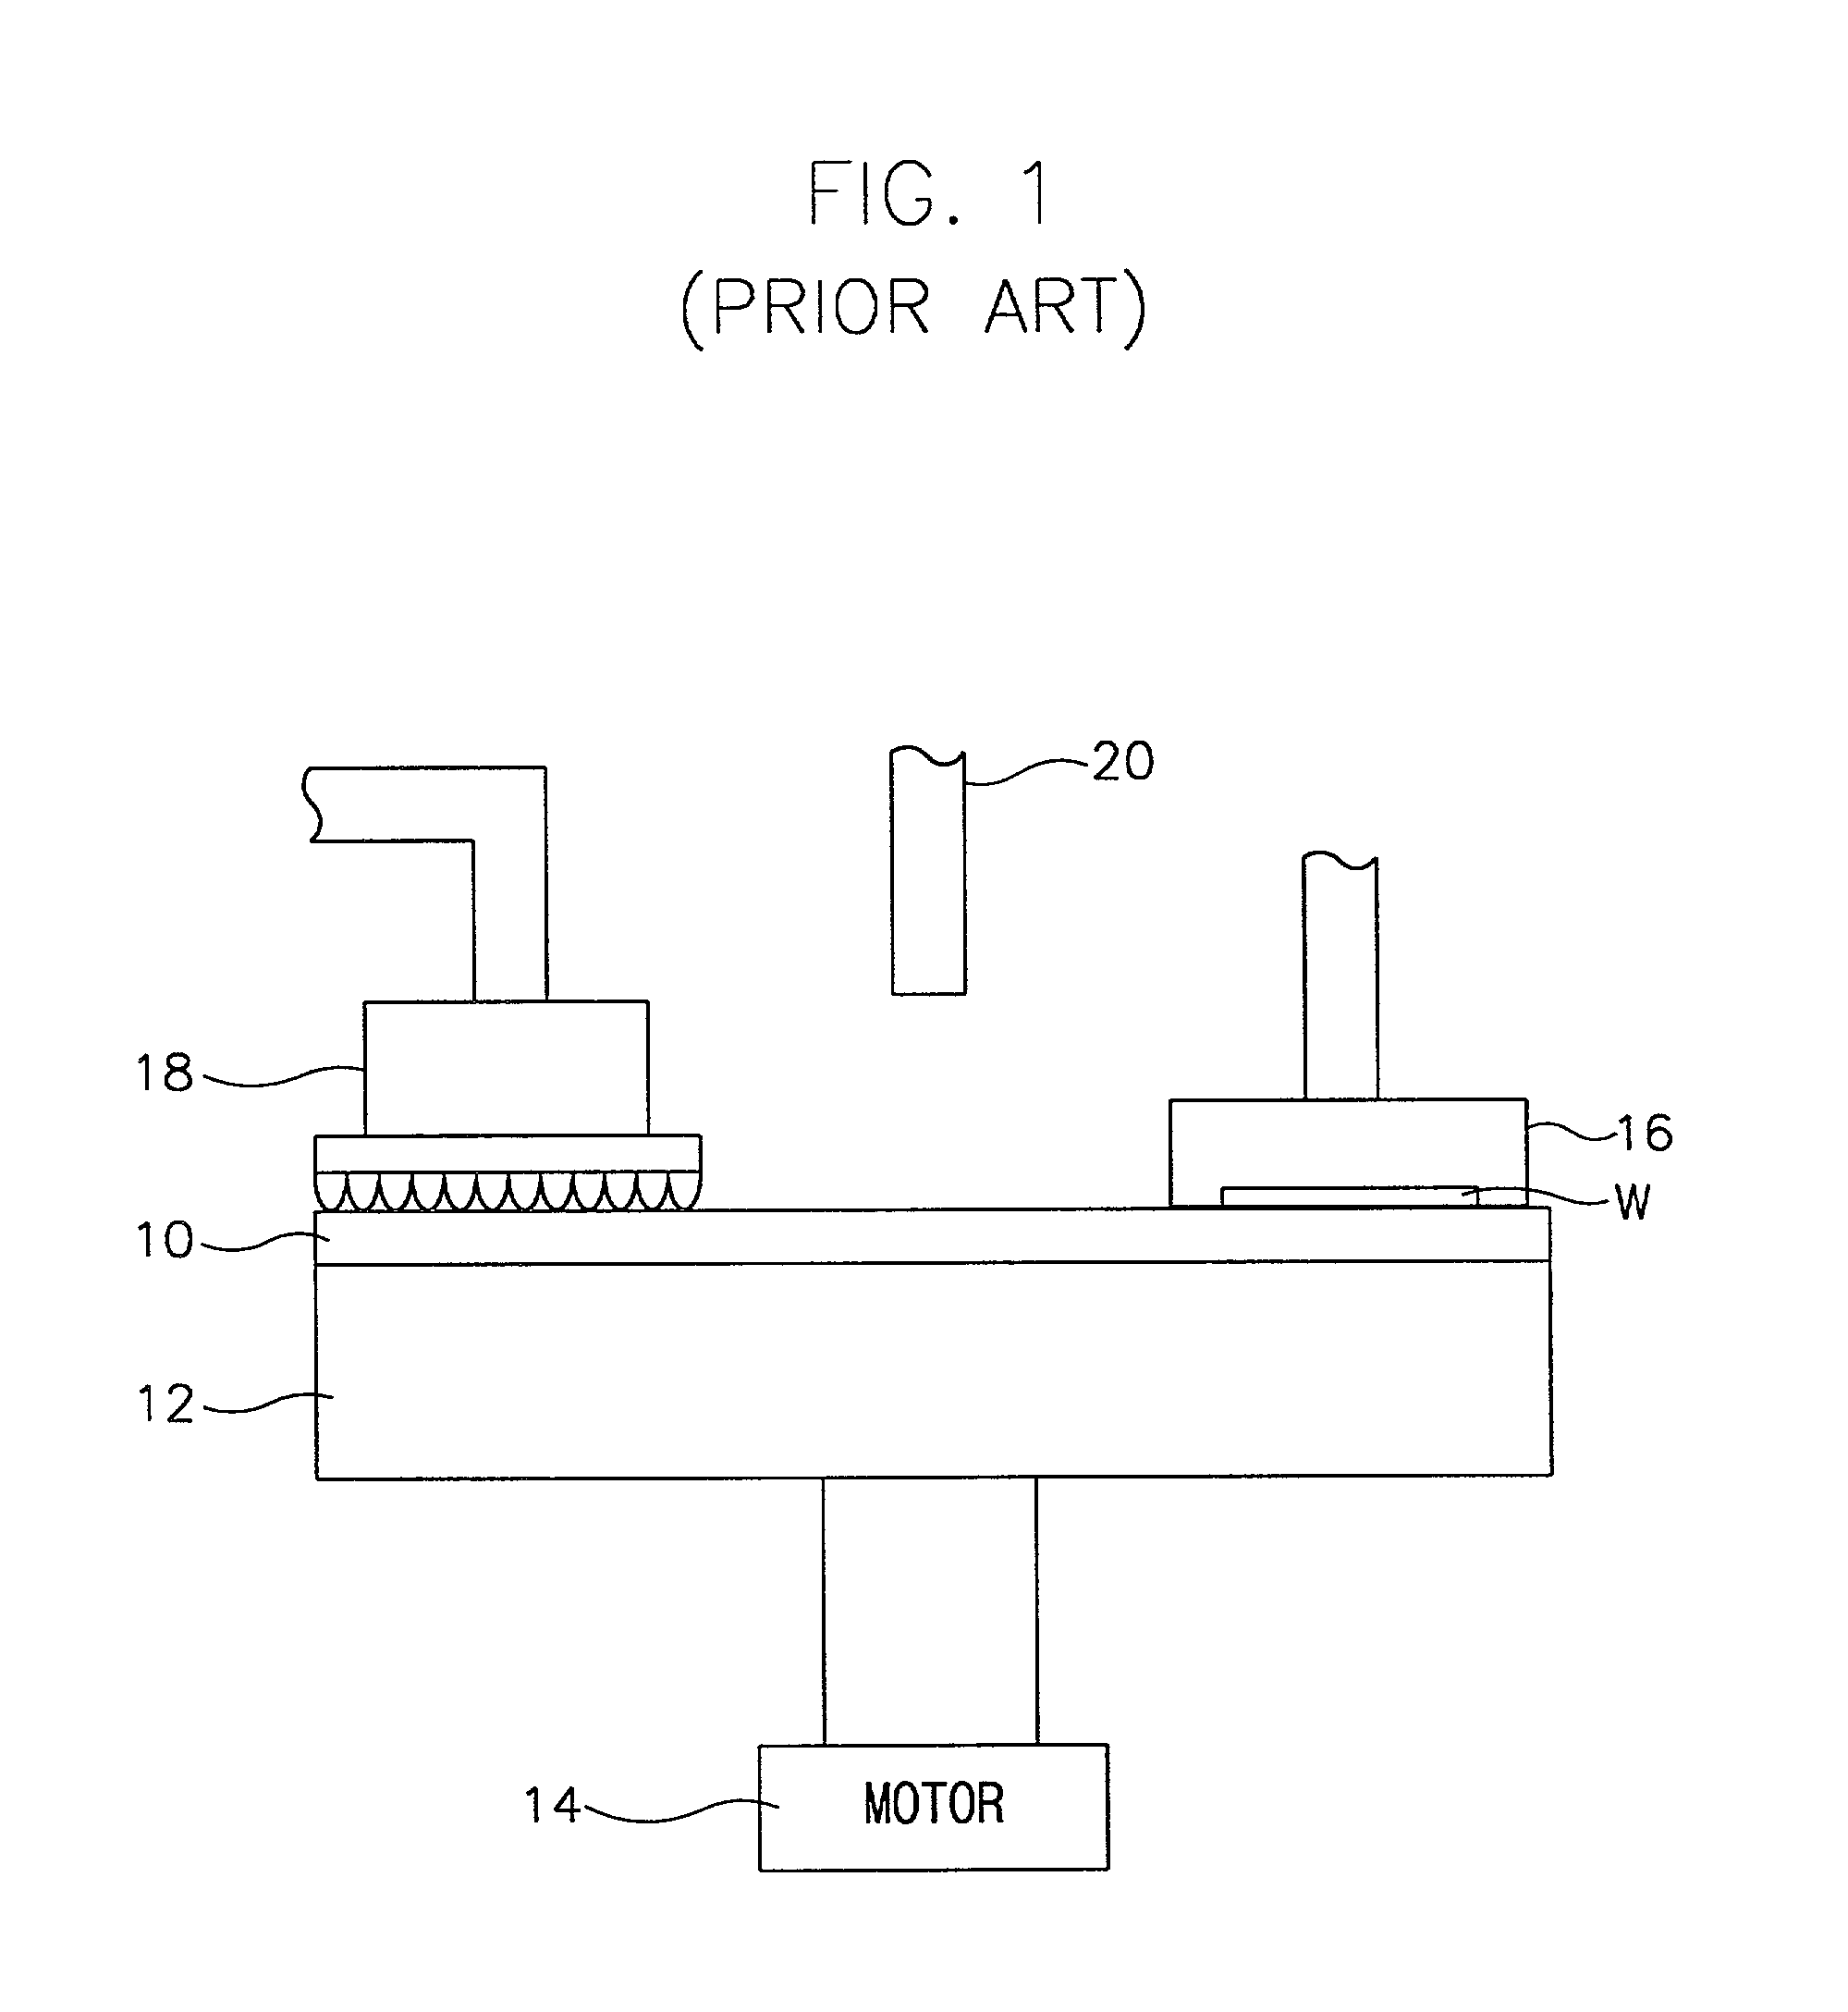 Method for inspecting a polishing pad in a semiconductor manufacturing process, an apparatus for performing the method, and a polishing device adopting the apparatus